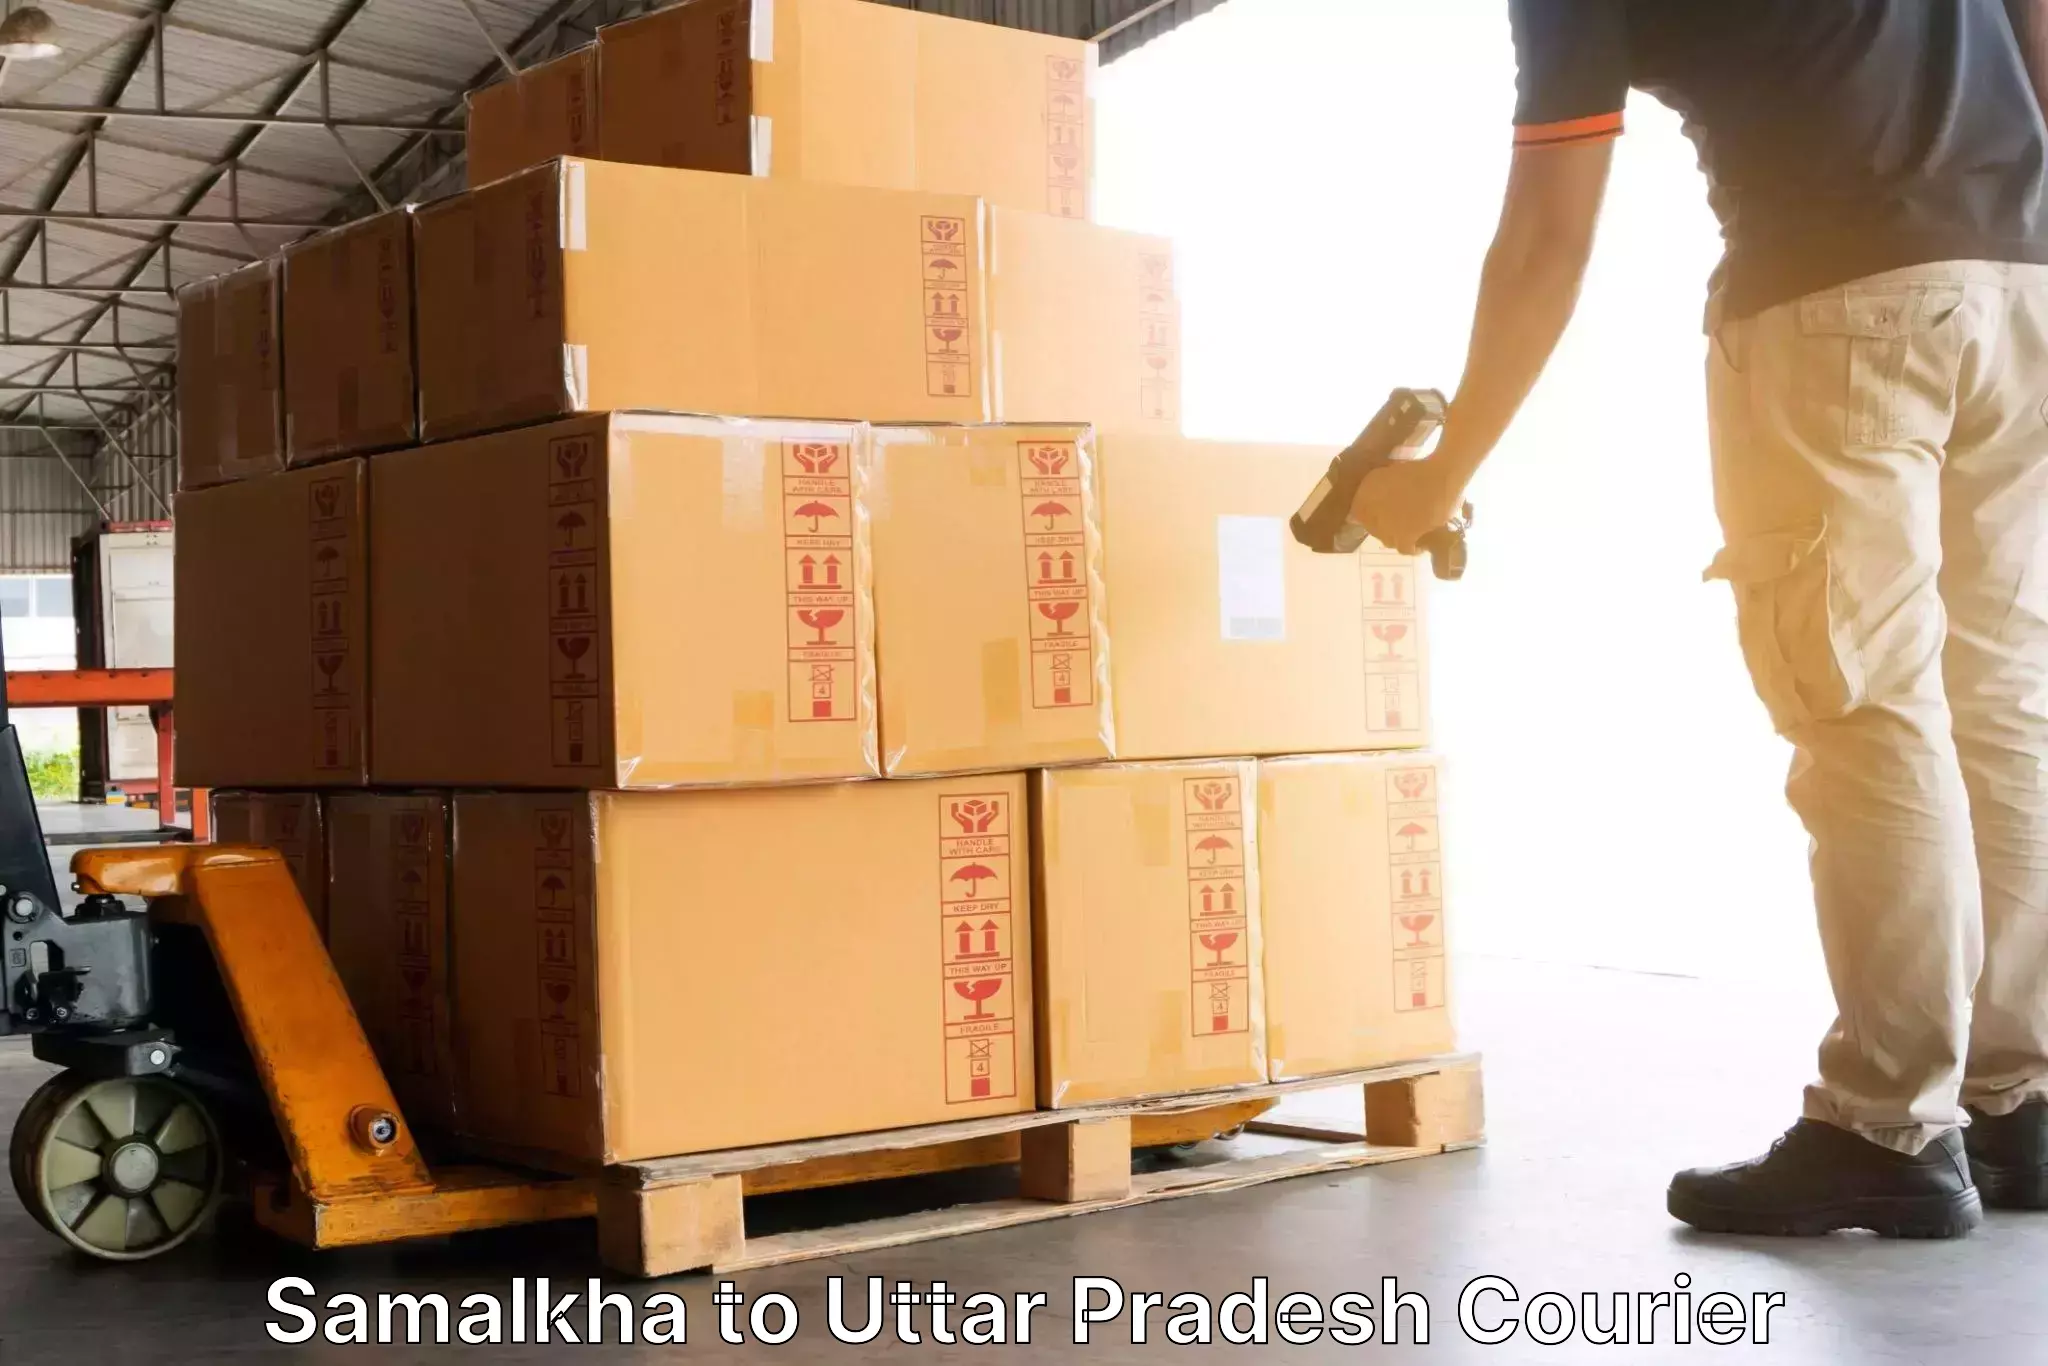 24-hour courier services in Samalkha to Gopiganj